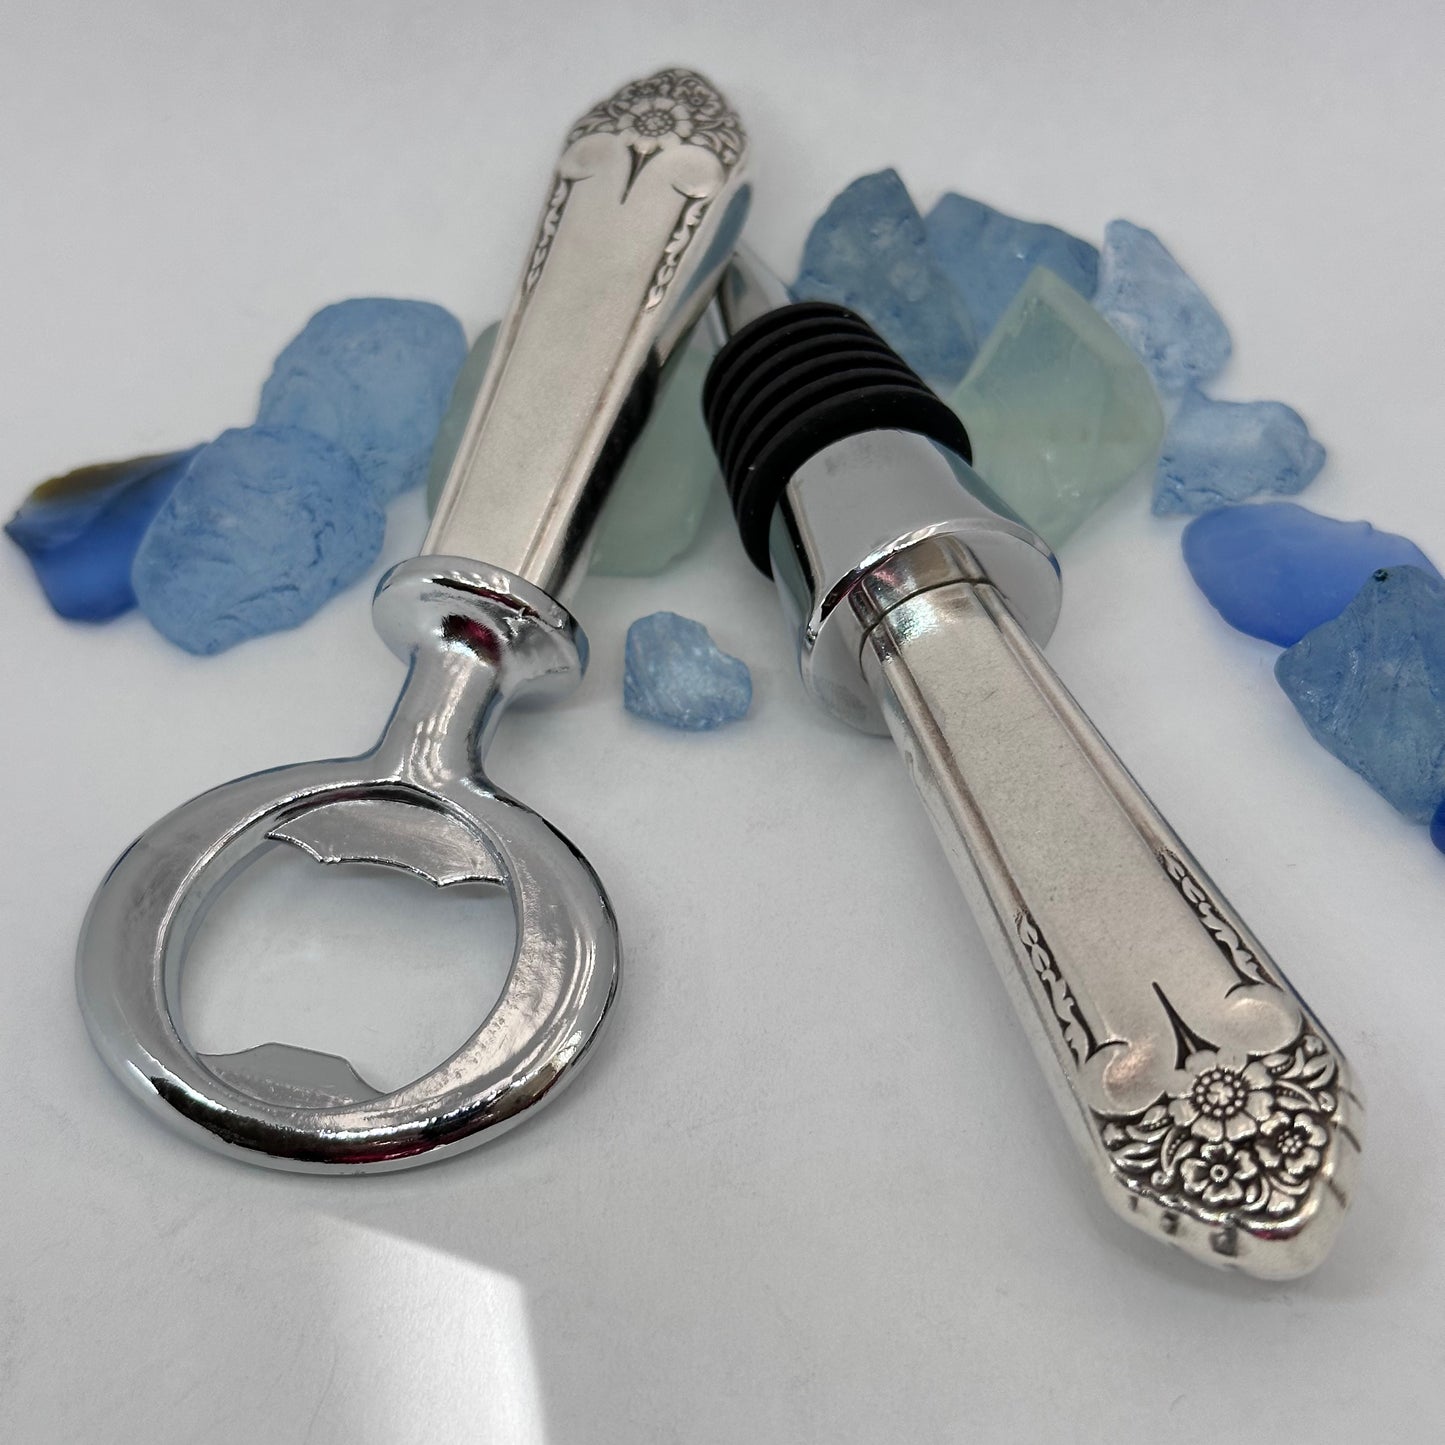 "Starlight” Vintage Silverware Bottle Opener | Silverplate 1950 | Up-Cycled Church Key | Antique Knife